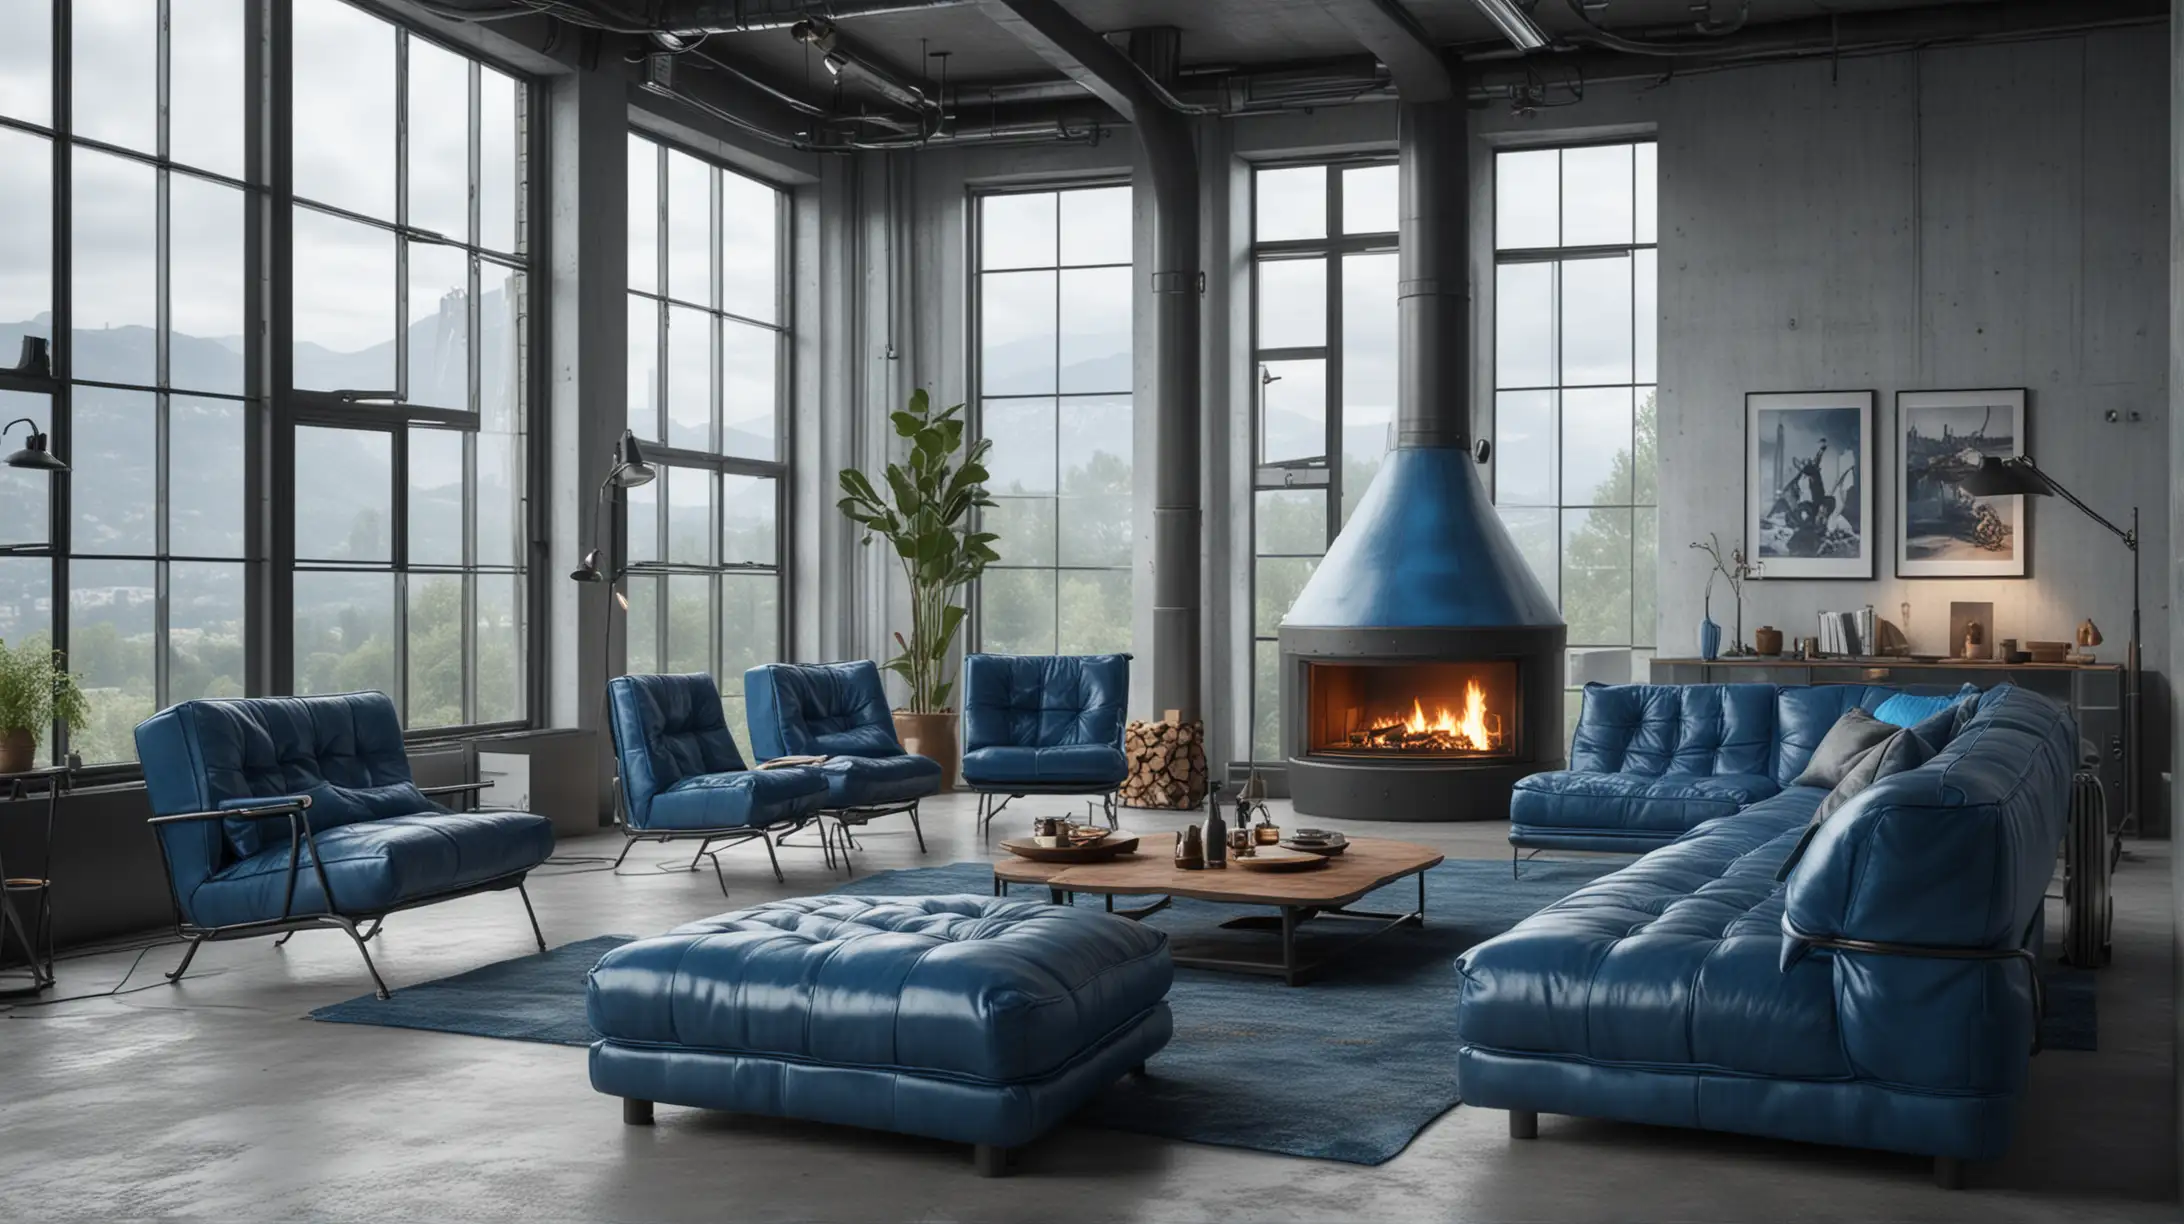 A blue-themed Neo-Industrial living room with huge picture windows and one free-standing fireplace and blue leather furnishings. Photo-realistic qualtiy, cinematic lighting.